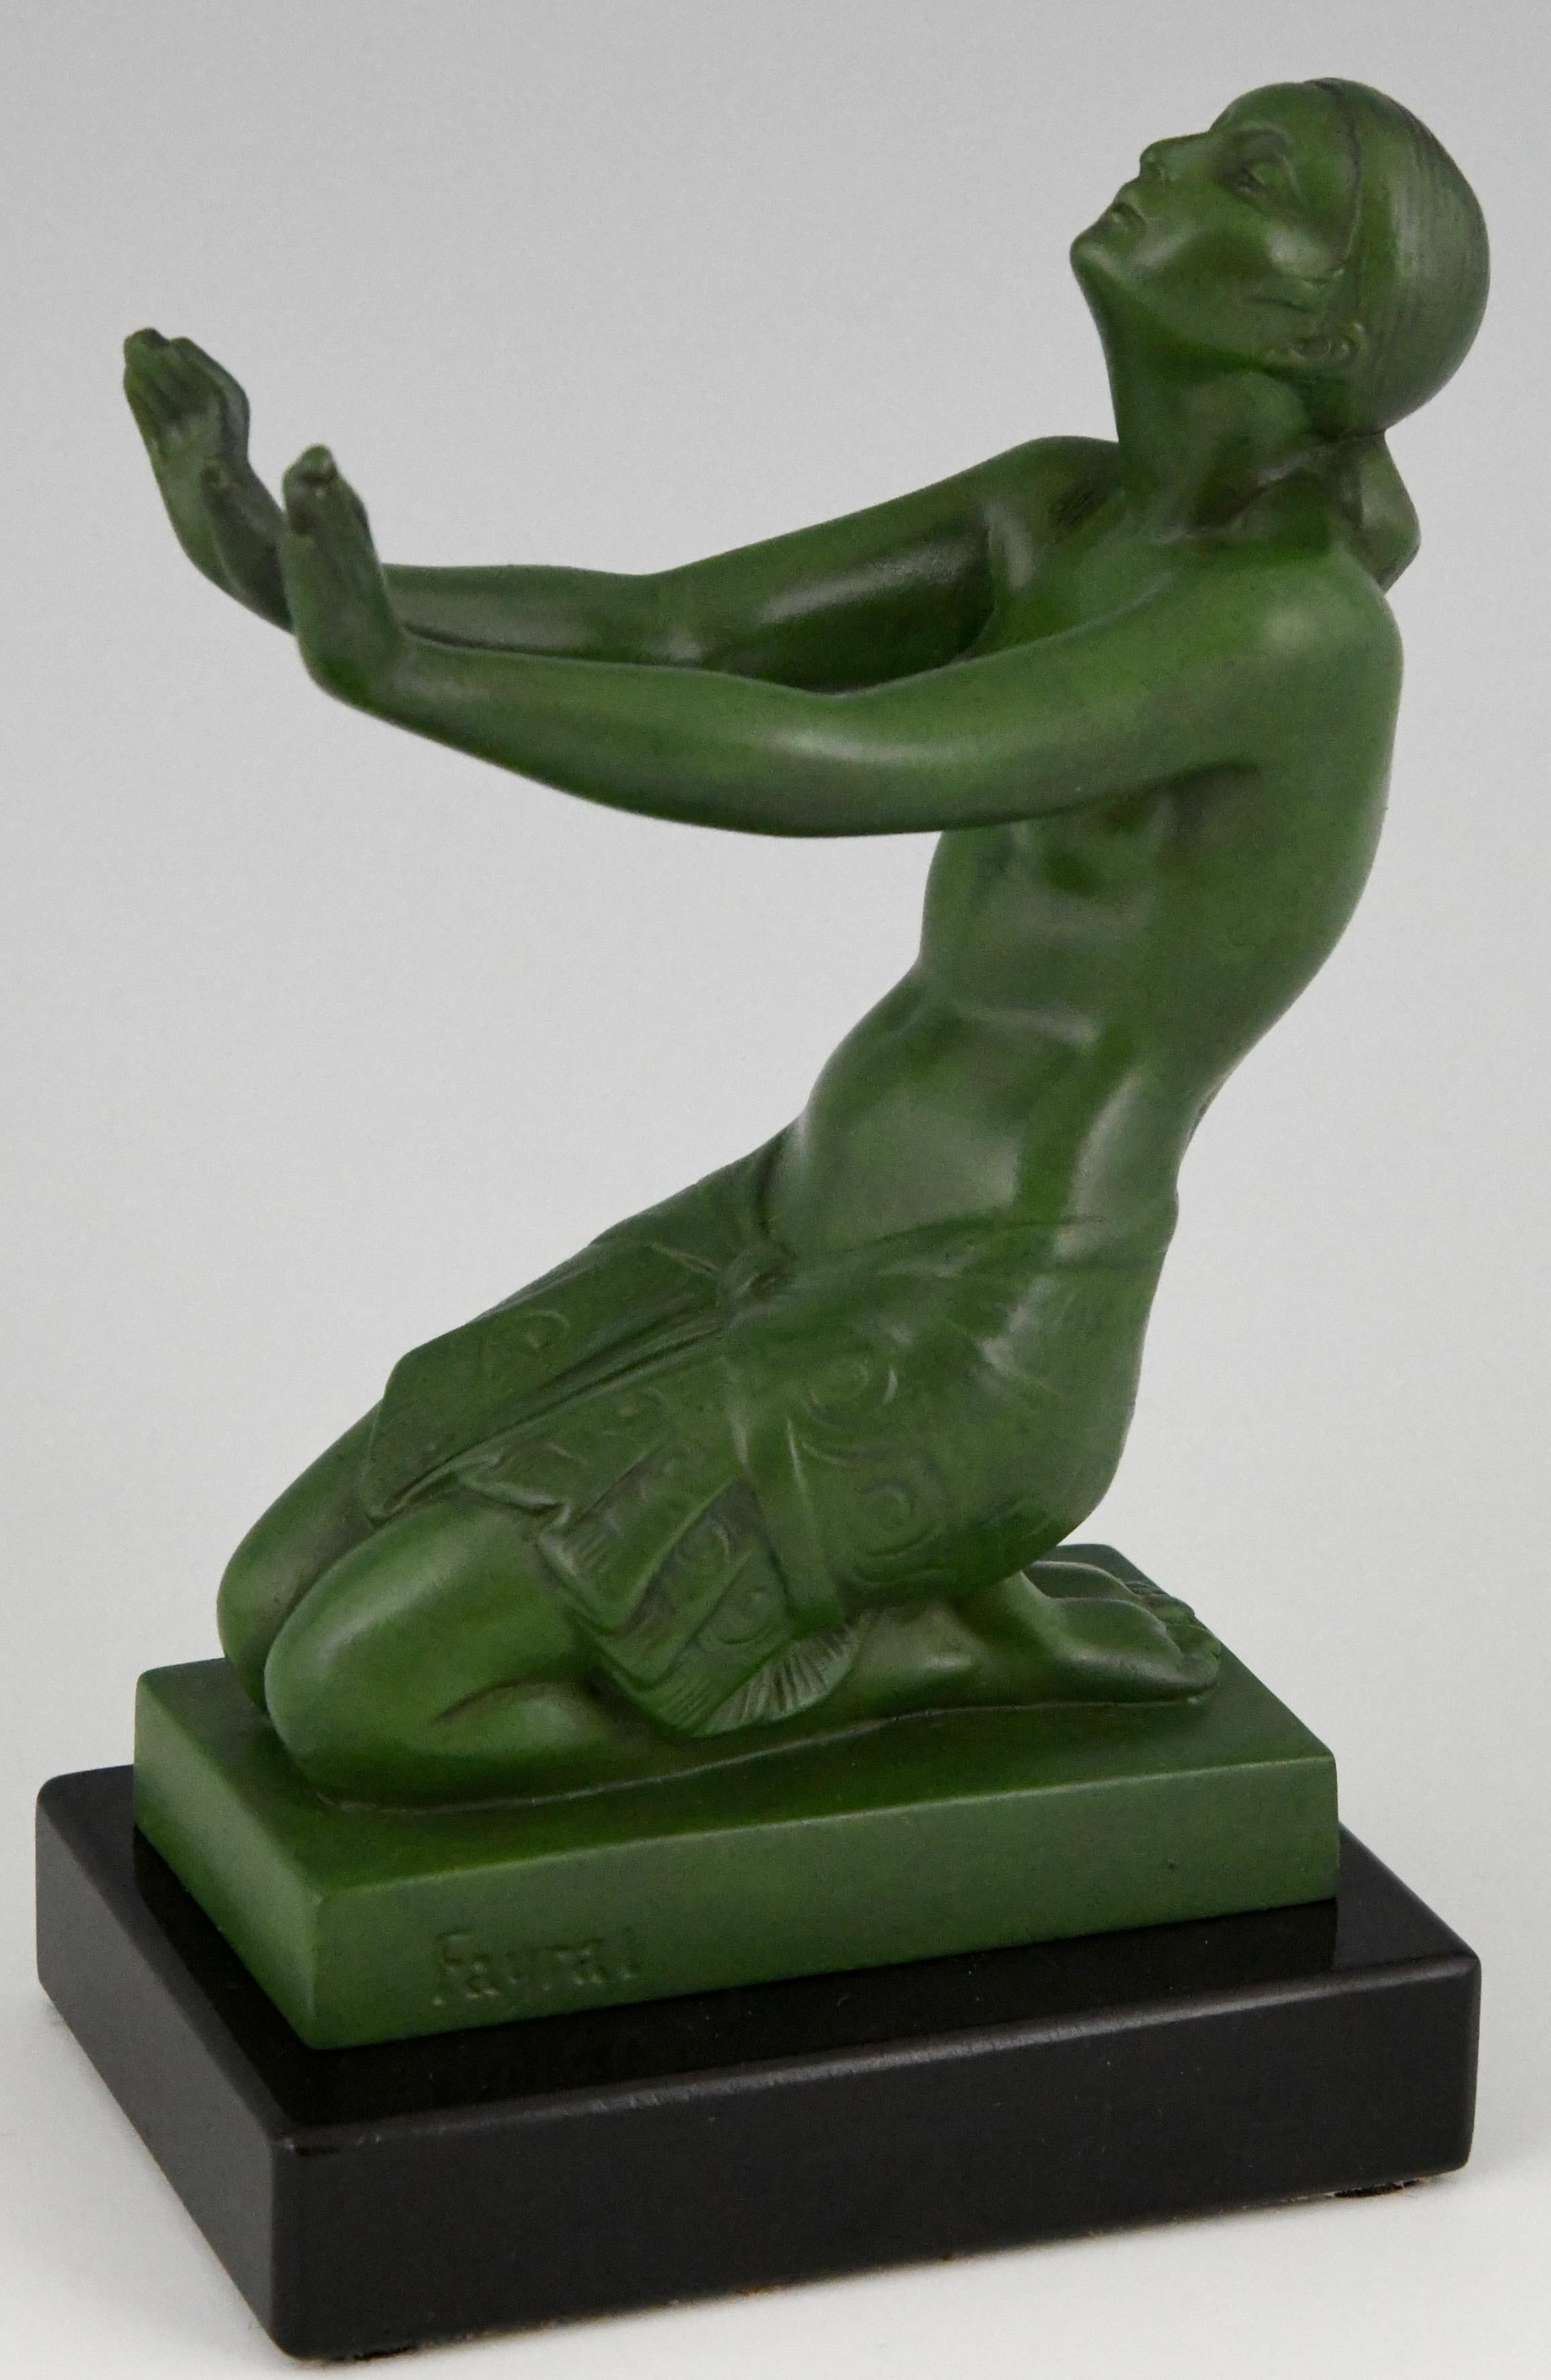 Metal Art Deco Bookends Nudes Fayral, Pierre Le Faguays for Max Le Verrier France 1930